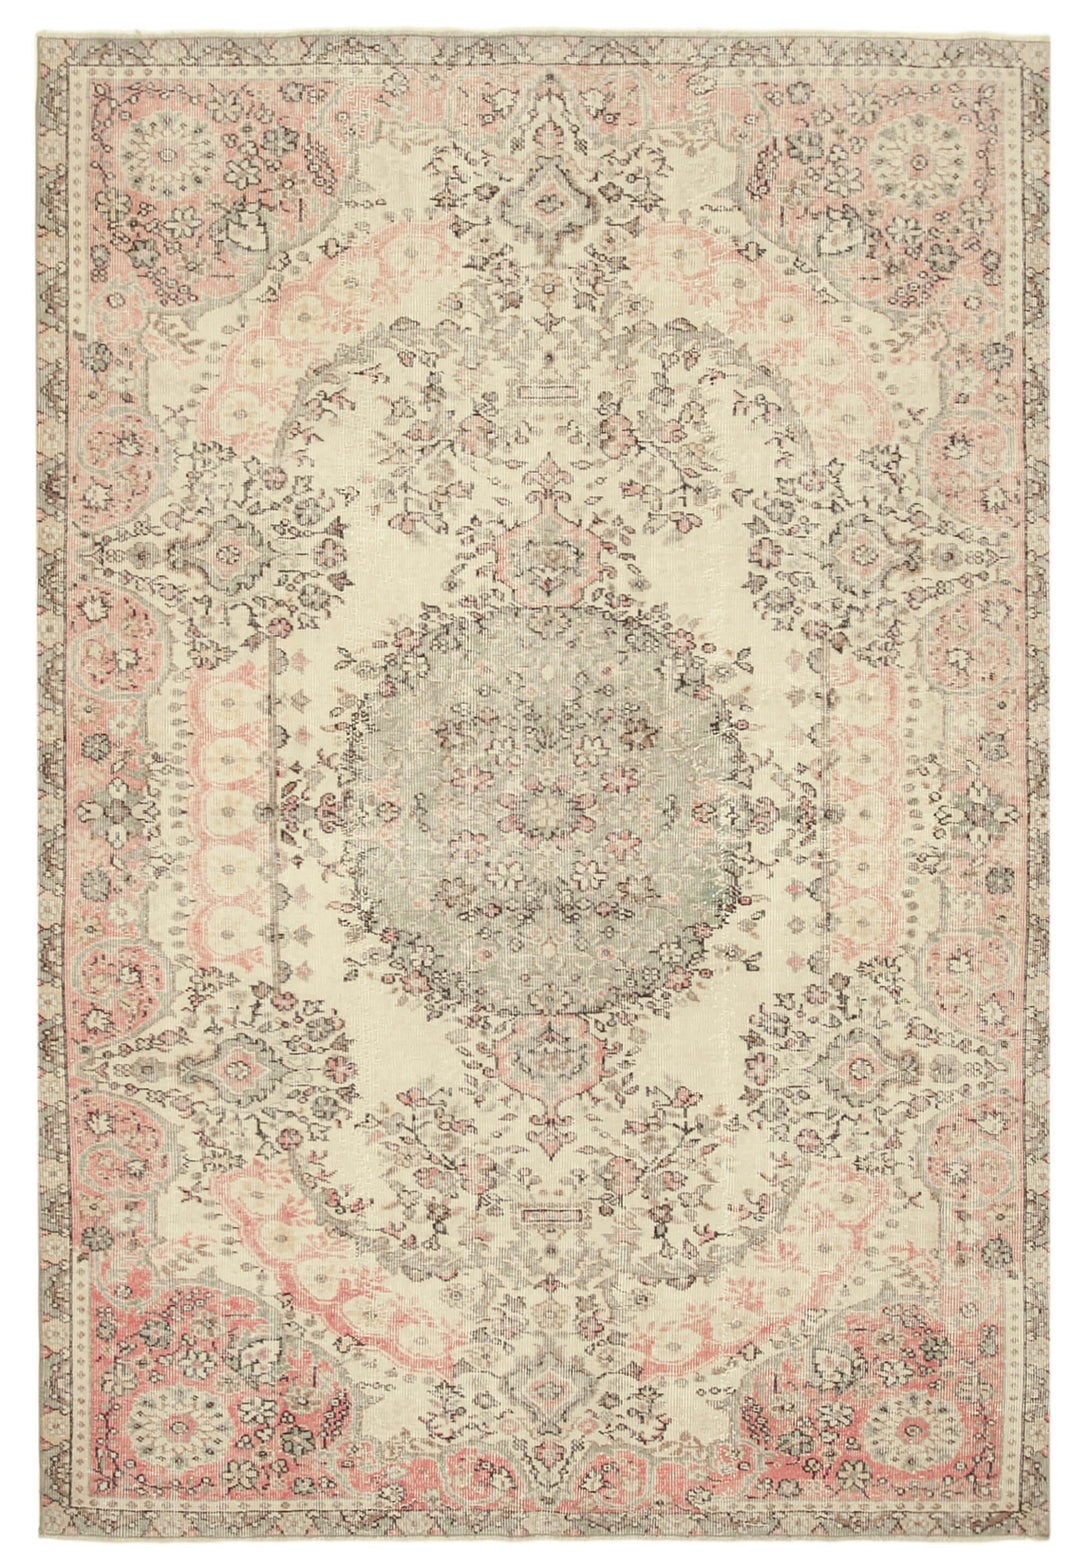 Handmade White Wash Area Rug > Design# OL-AC-38888 > Size: 6'-3" x 9'-4", Carpet Culture Rugs, Handmade Rugs, NYC Rugs, New Rugs, Shop Rugs, Rug Store, Outlet Rugs, SoHo Rugs, Rugs in USA